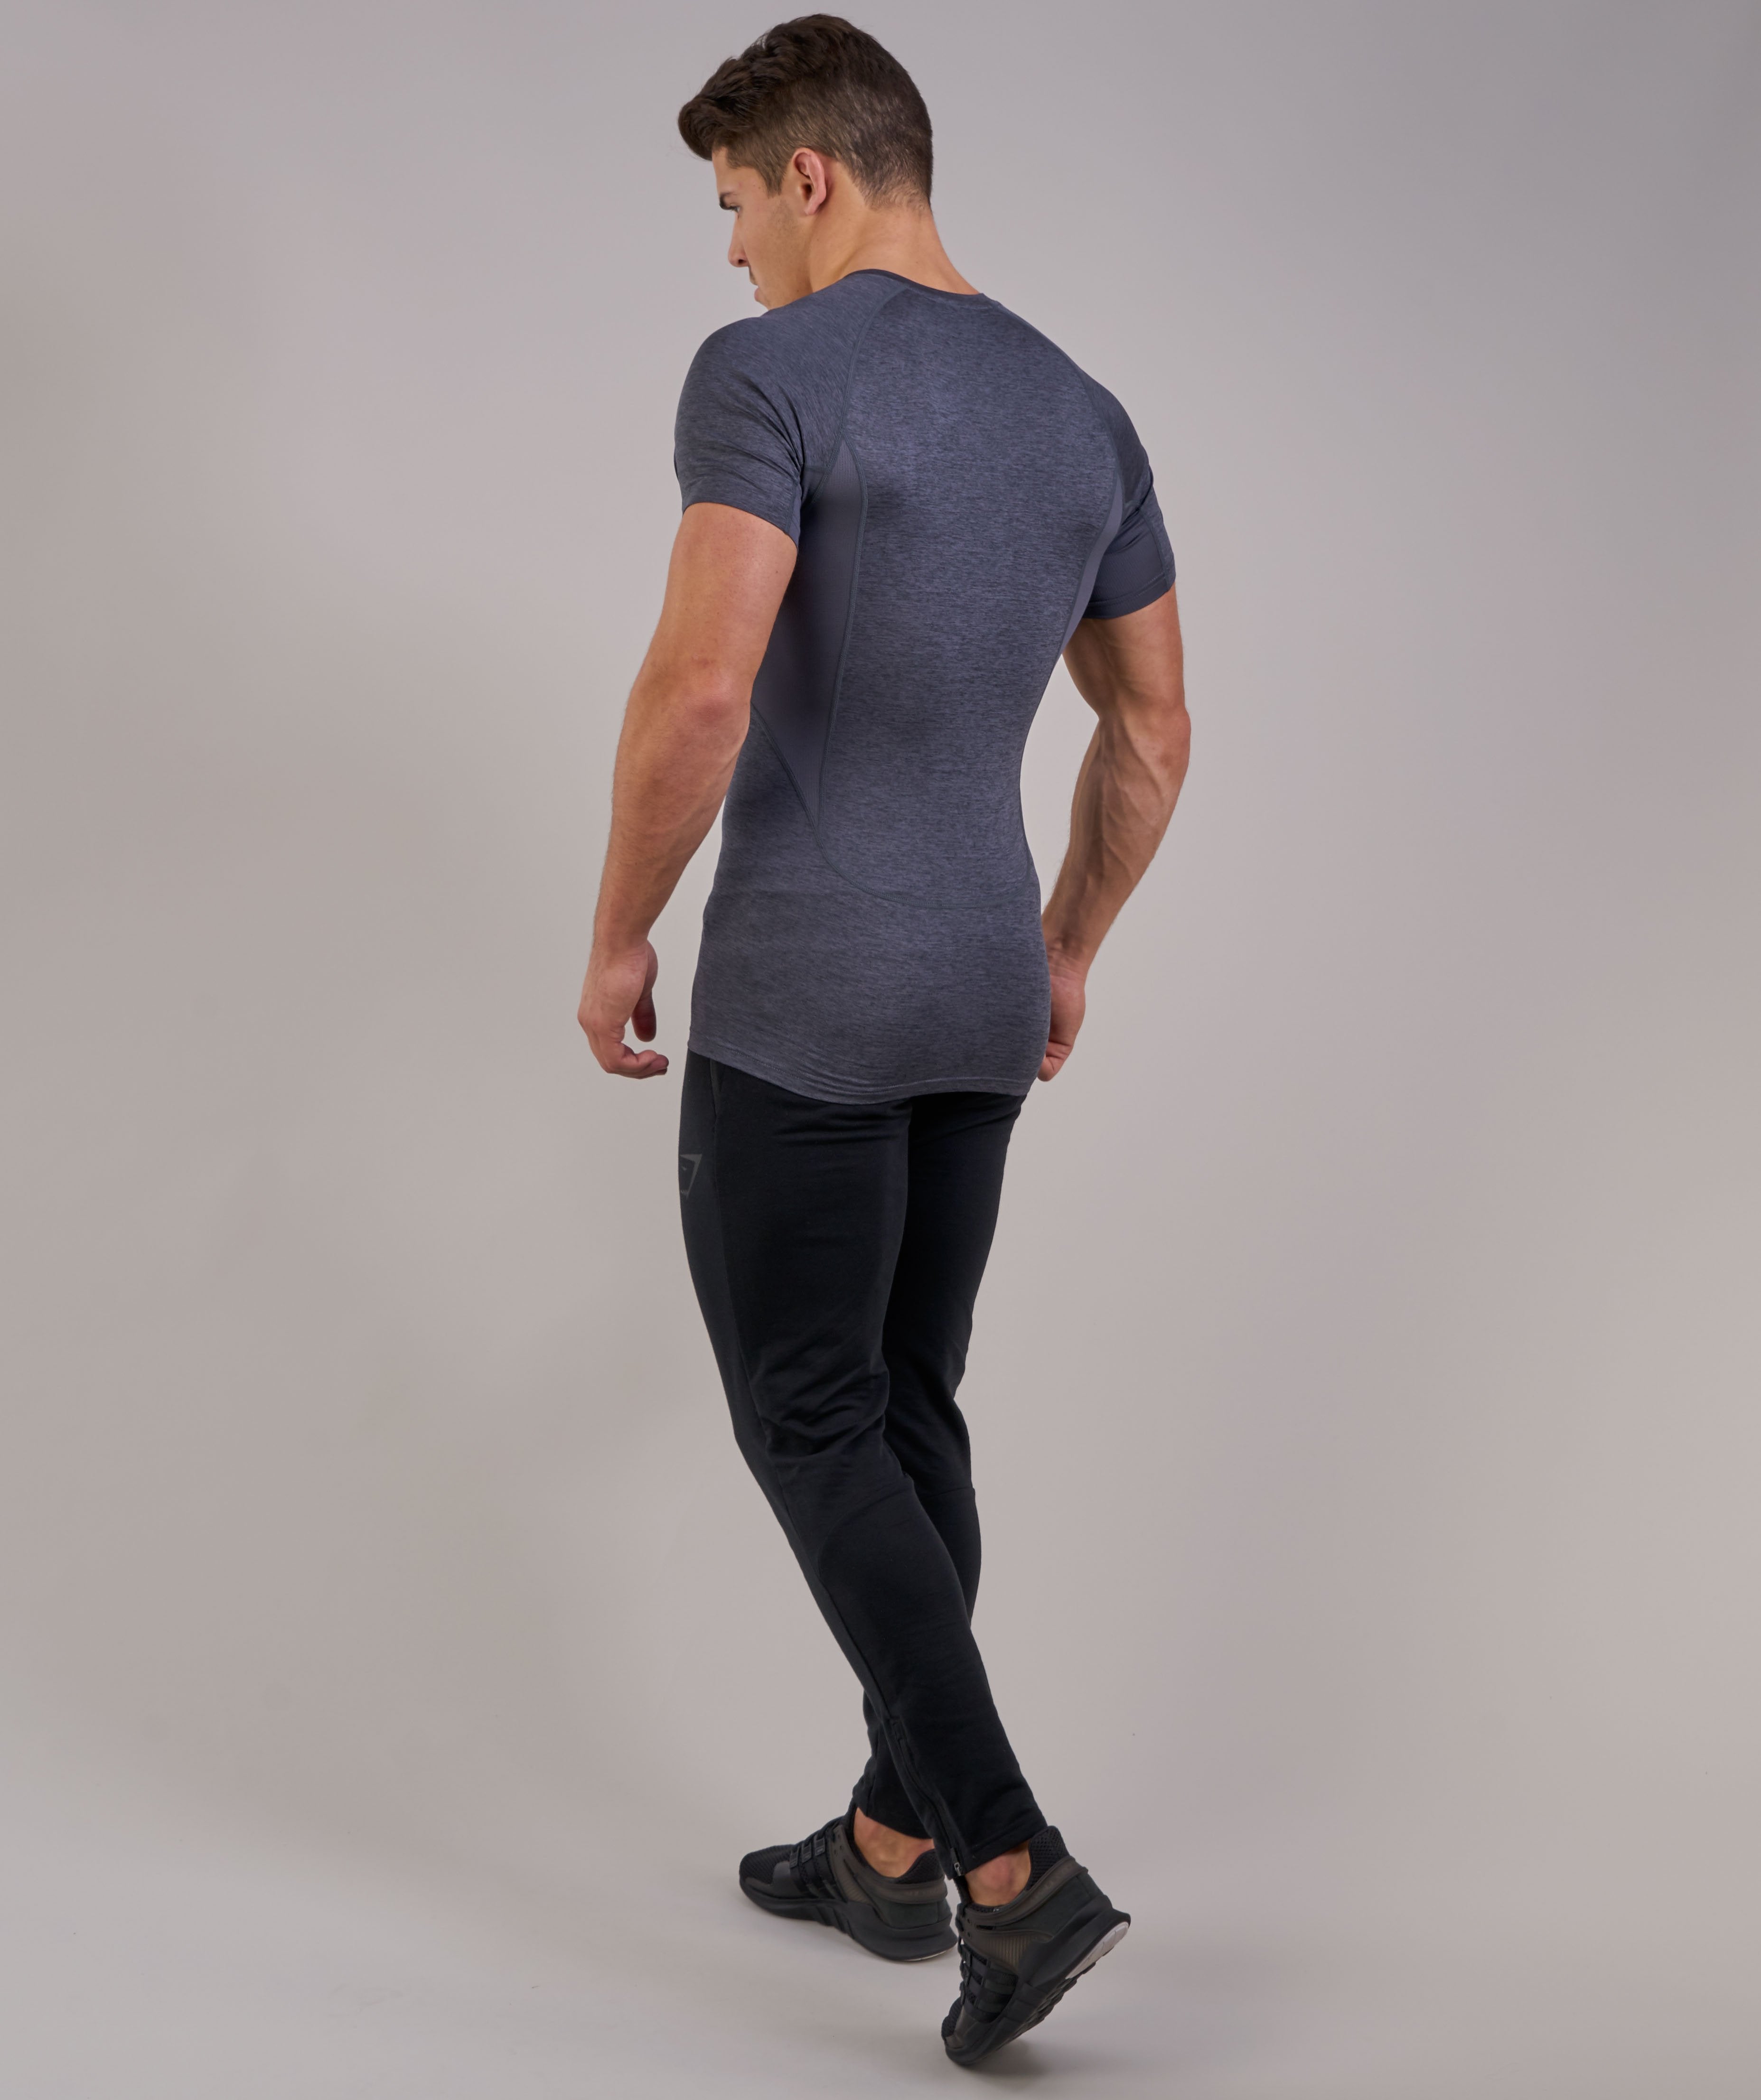 Element Baselayer Short Sleeve Top in Charcoal Marl - view 2